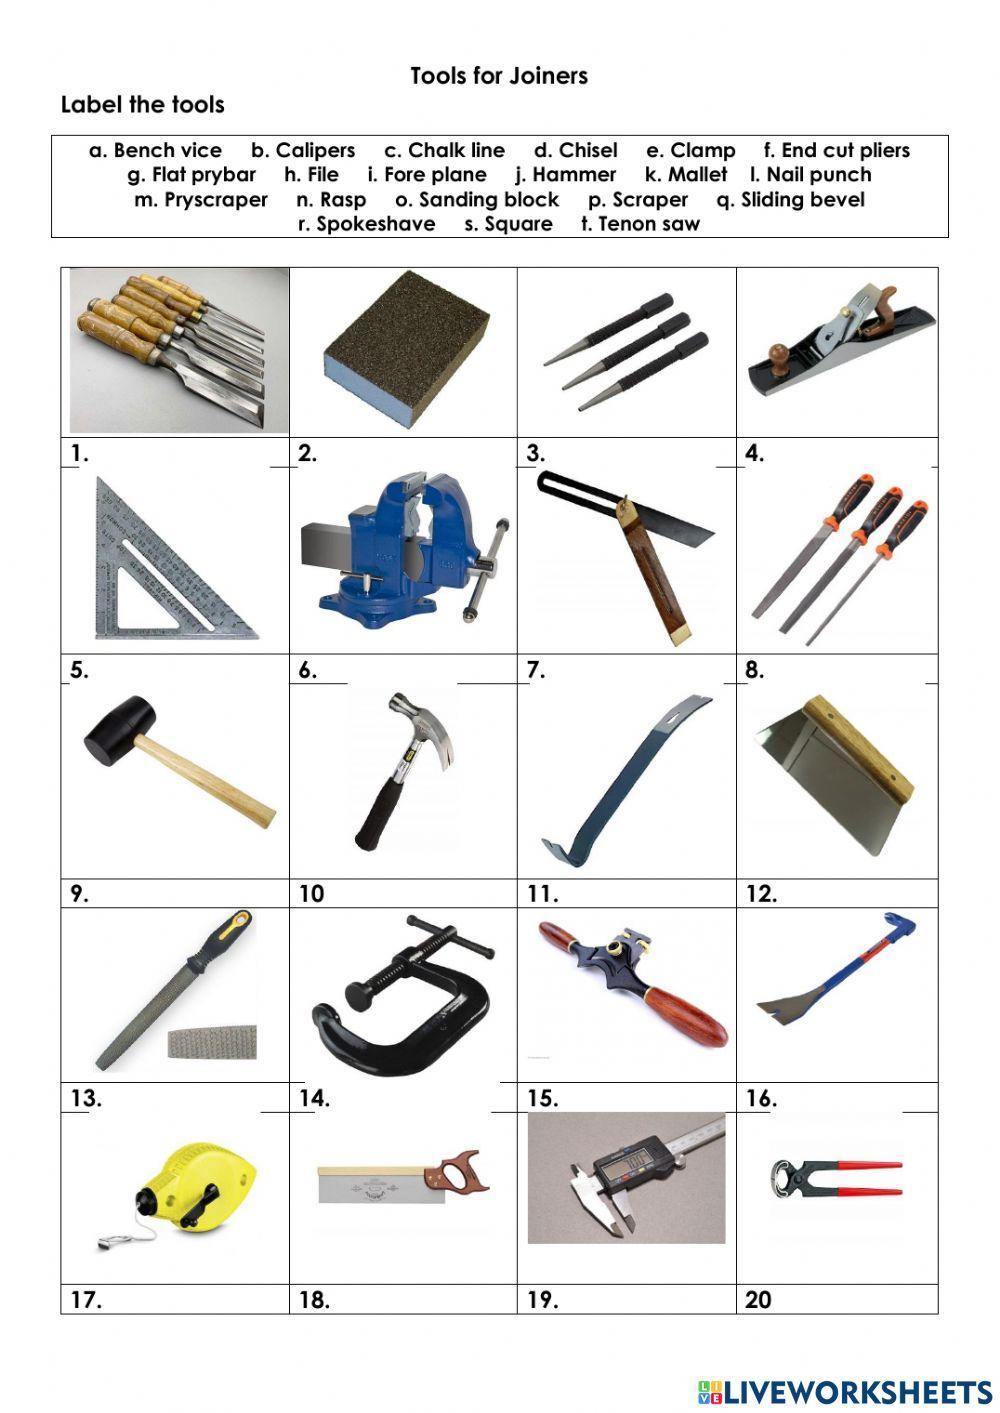 Tools for Joiners